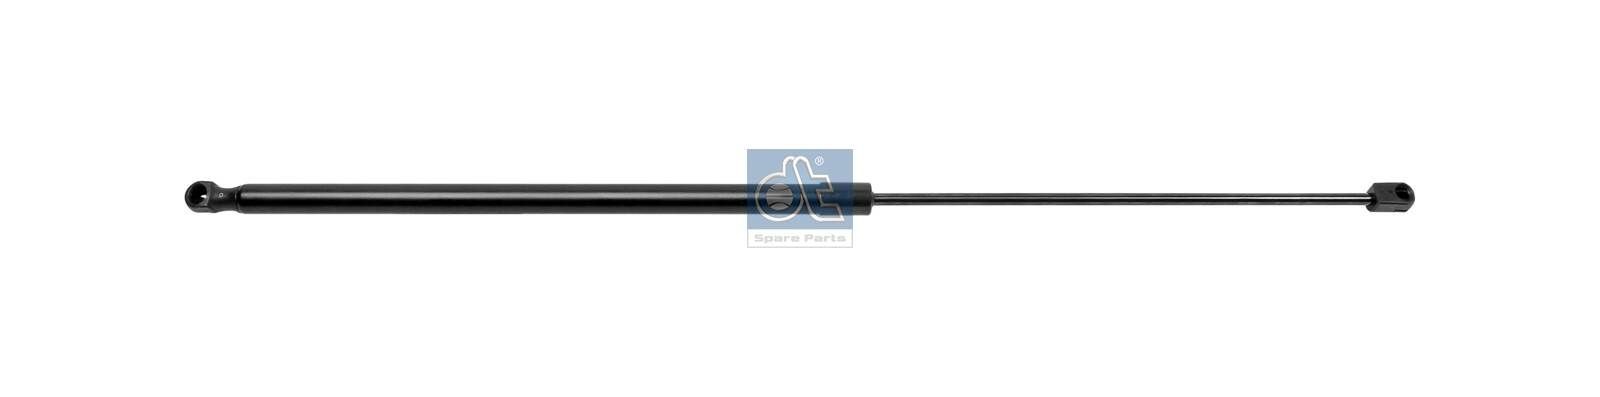 DT Spare Parts 380N, 735 mm Gas Spring 1.23371 buy